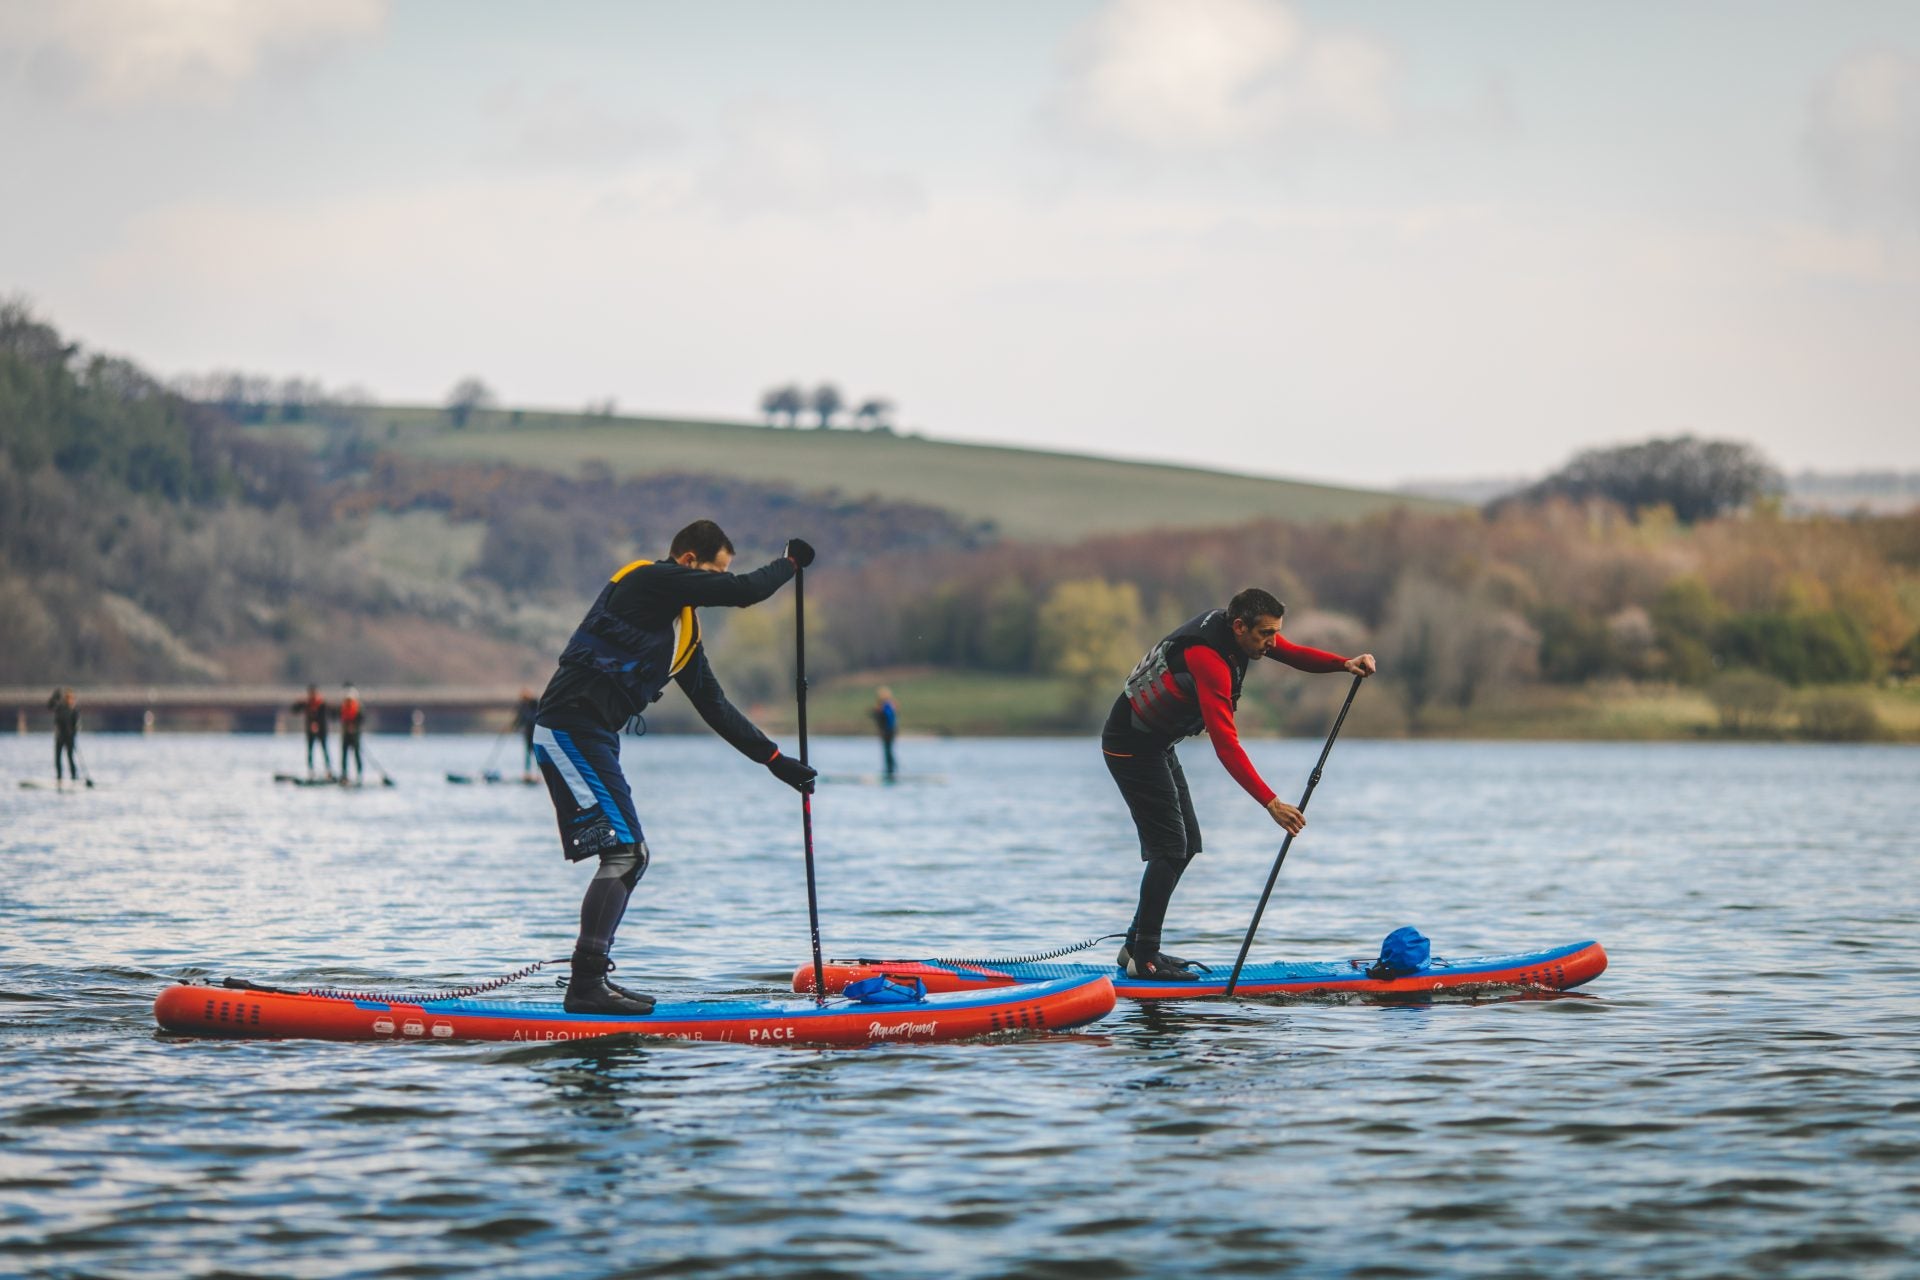 Two people on Aquaplanet PACE paddle boards racing each other